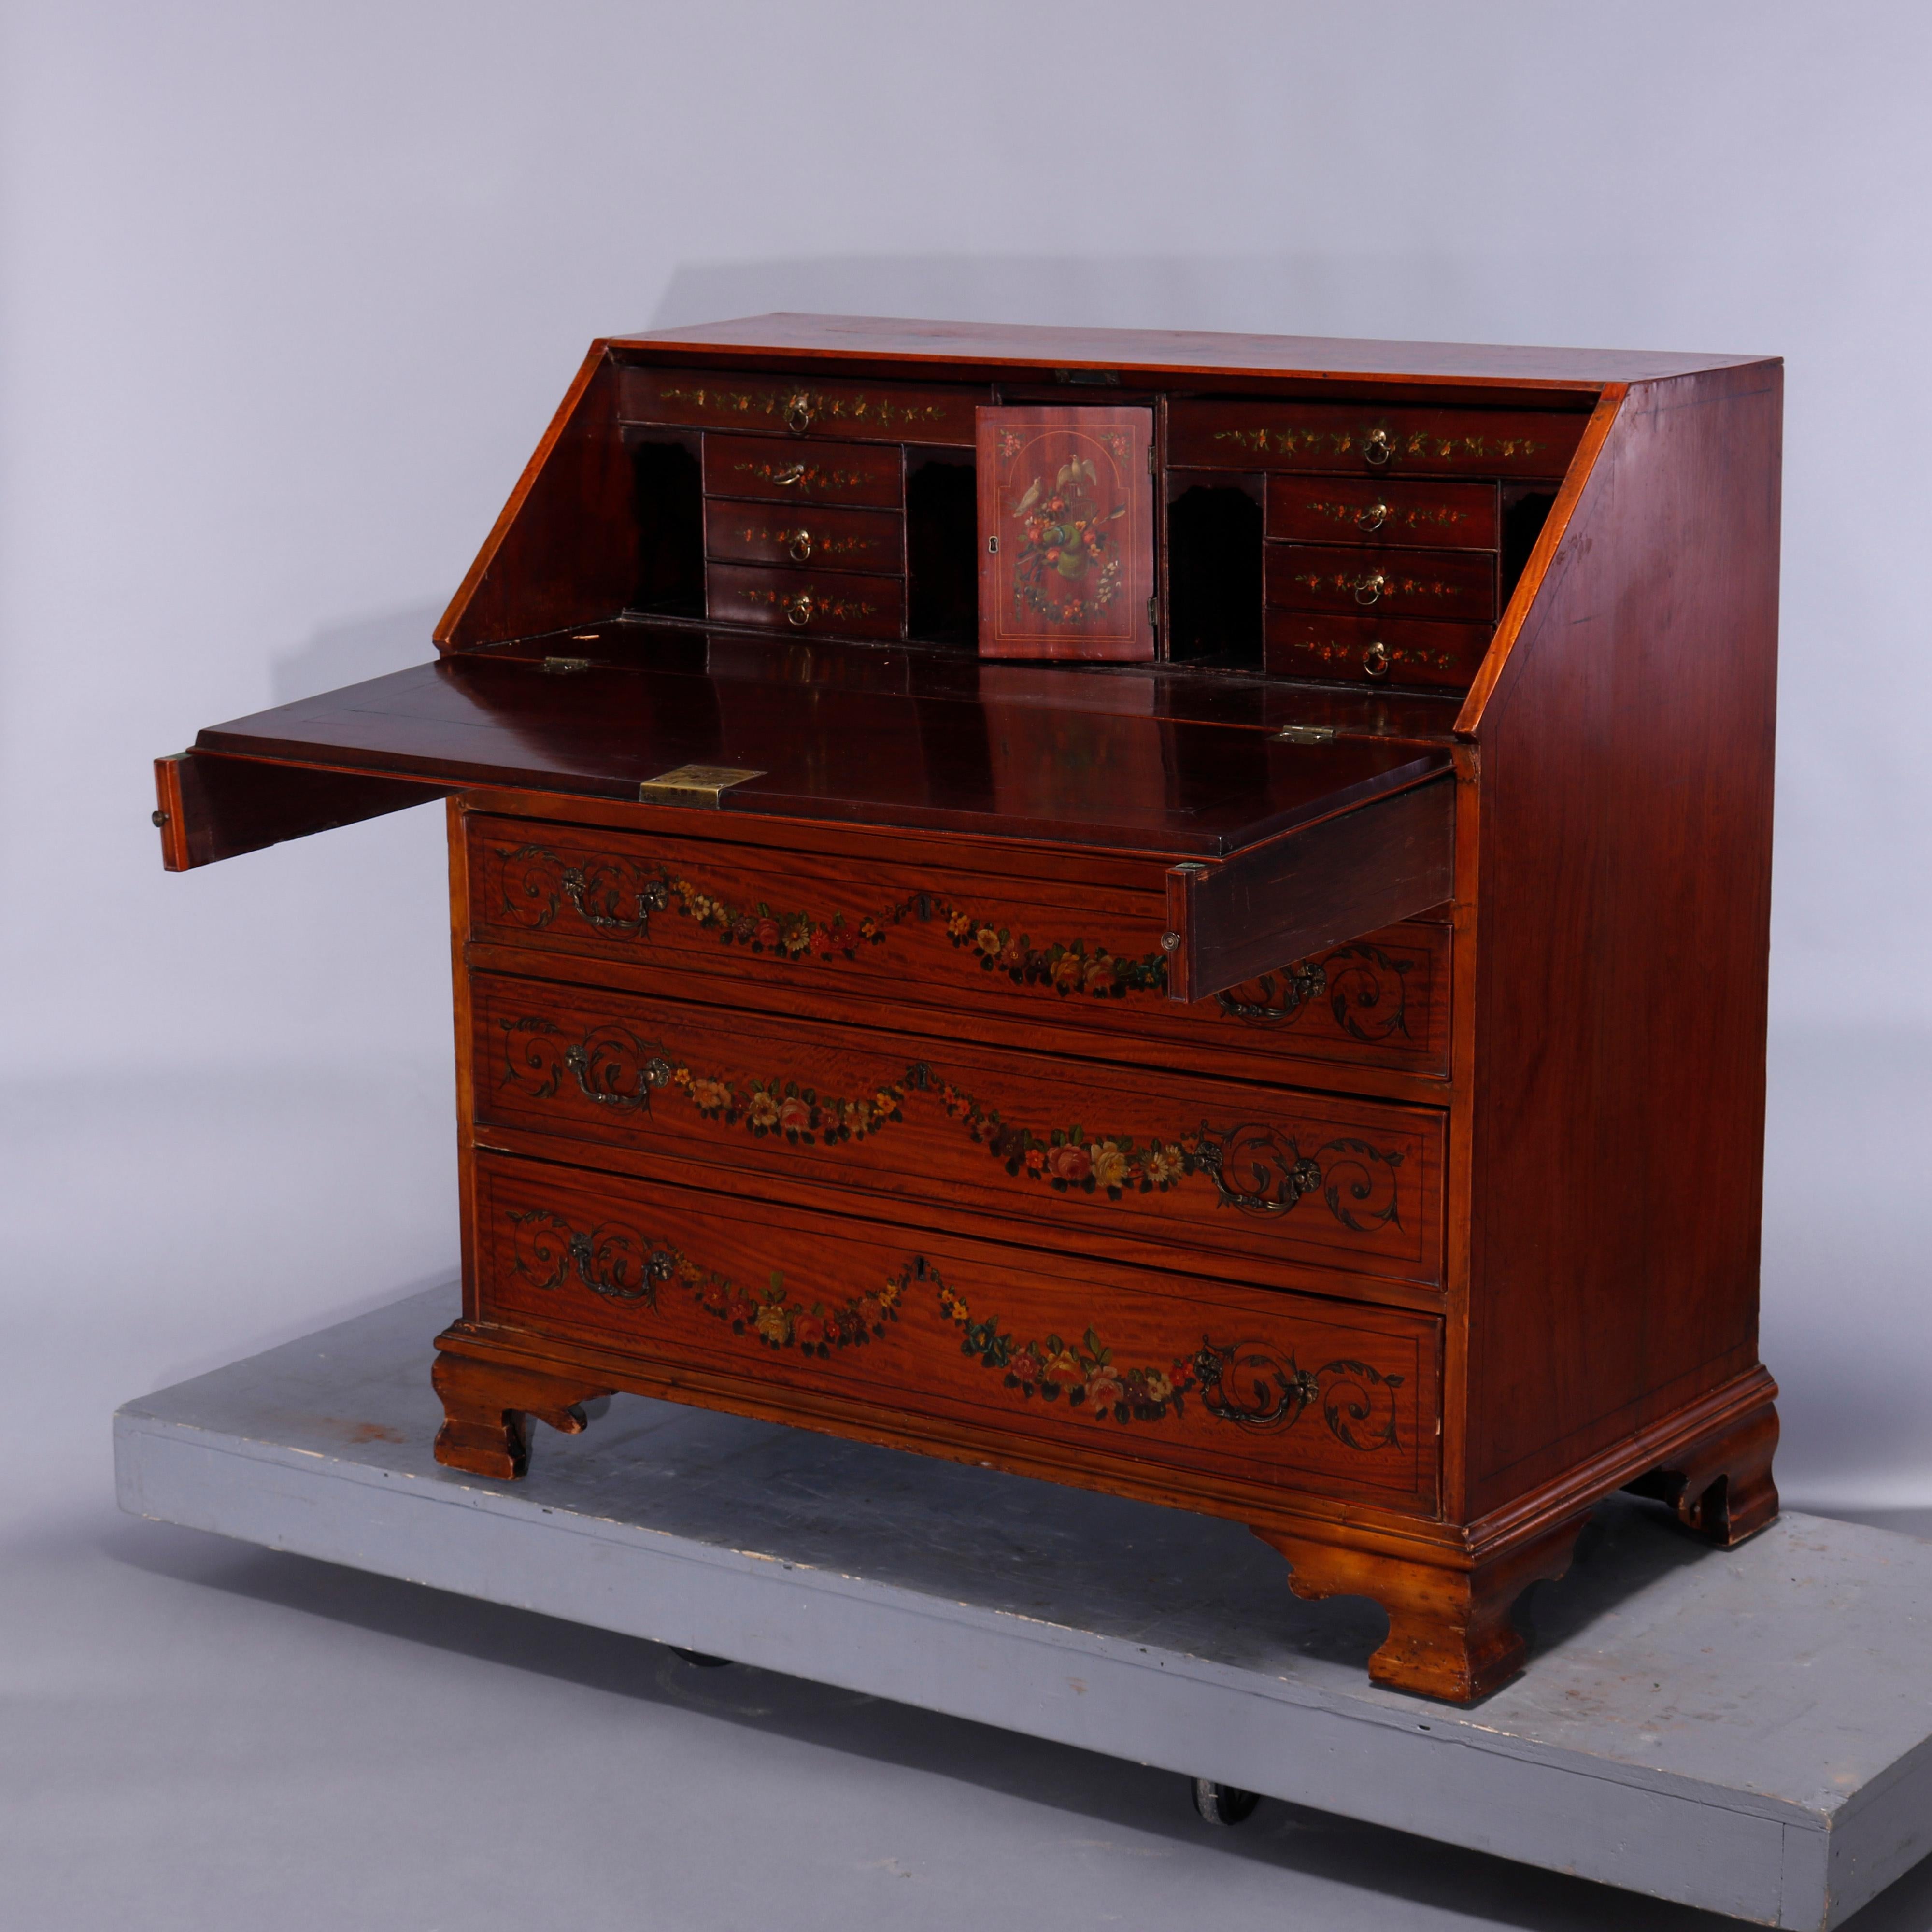 Antique English Adams Decorated Satinwood Drop-Front Desk, 18th-19th C For Sale 1